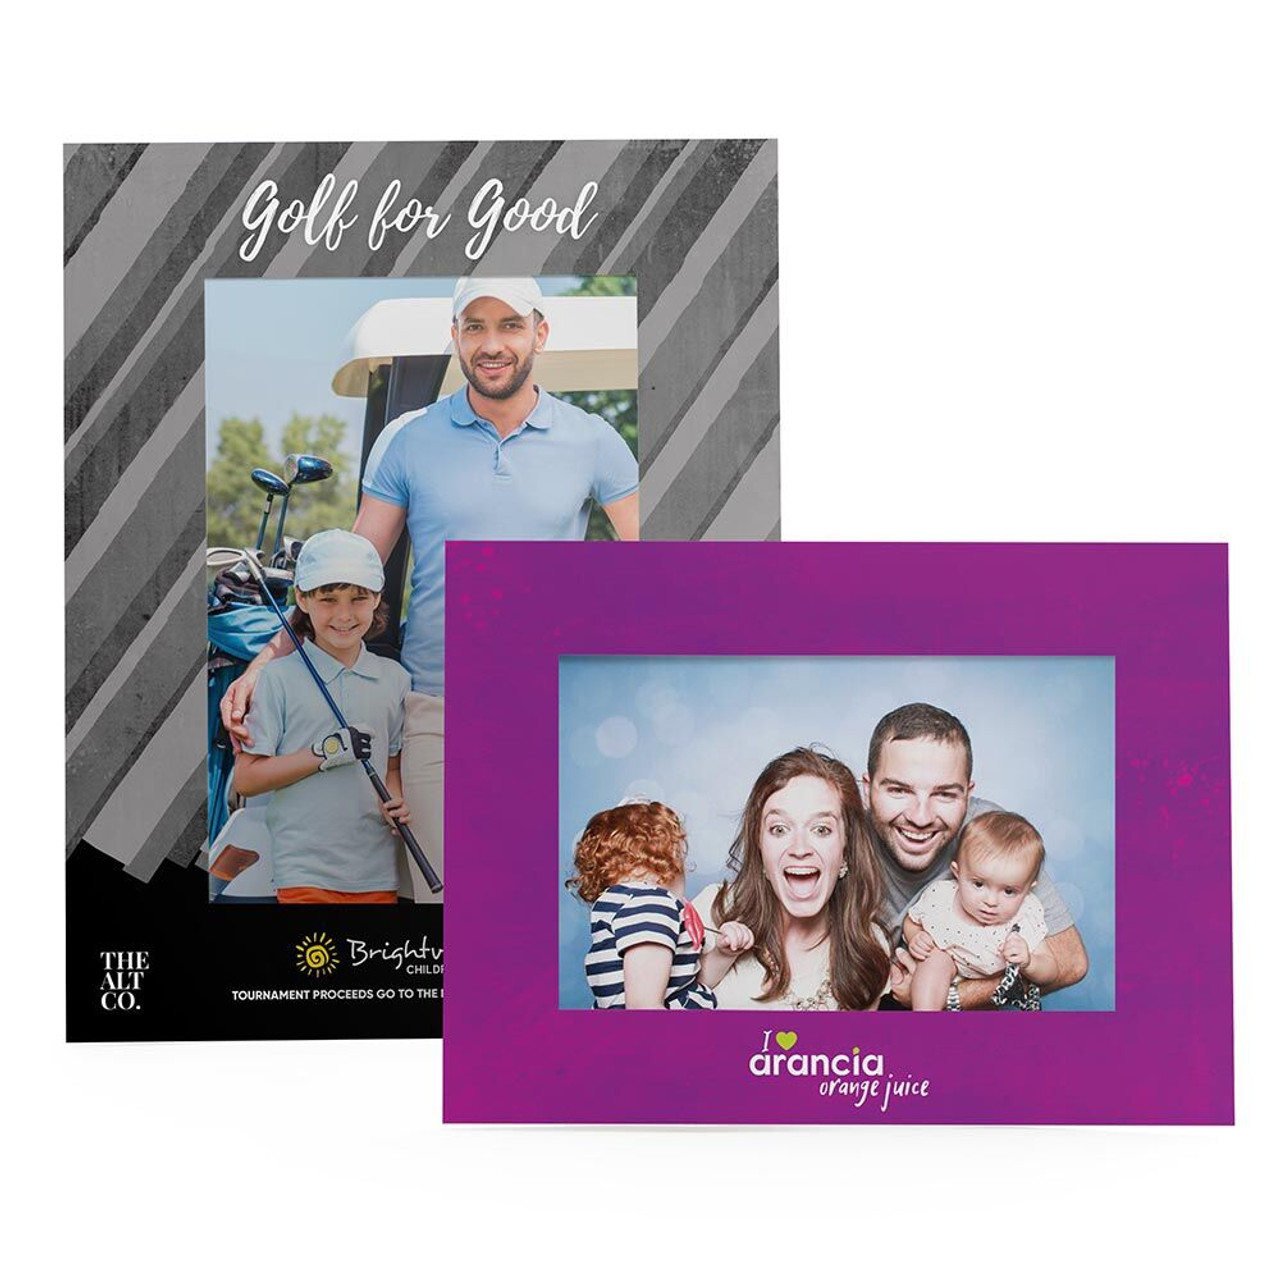 Printed Photo Collage Personalized Family 4x6 Box Frame - Horizontal